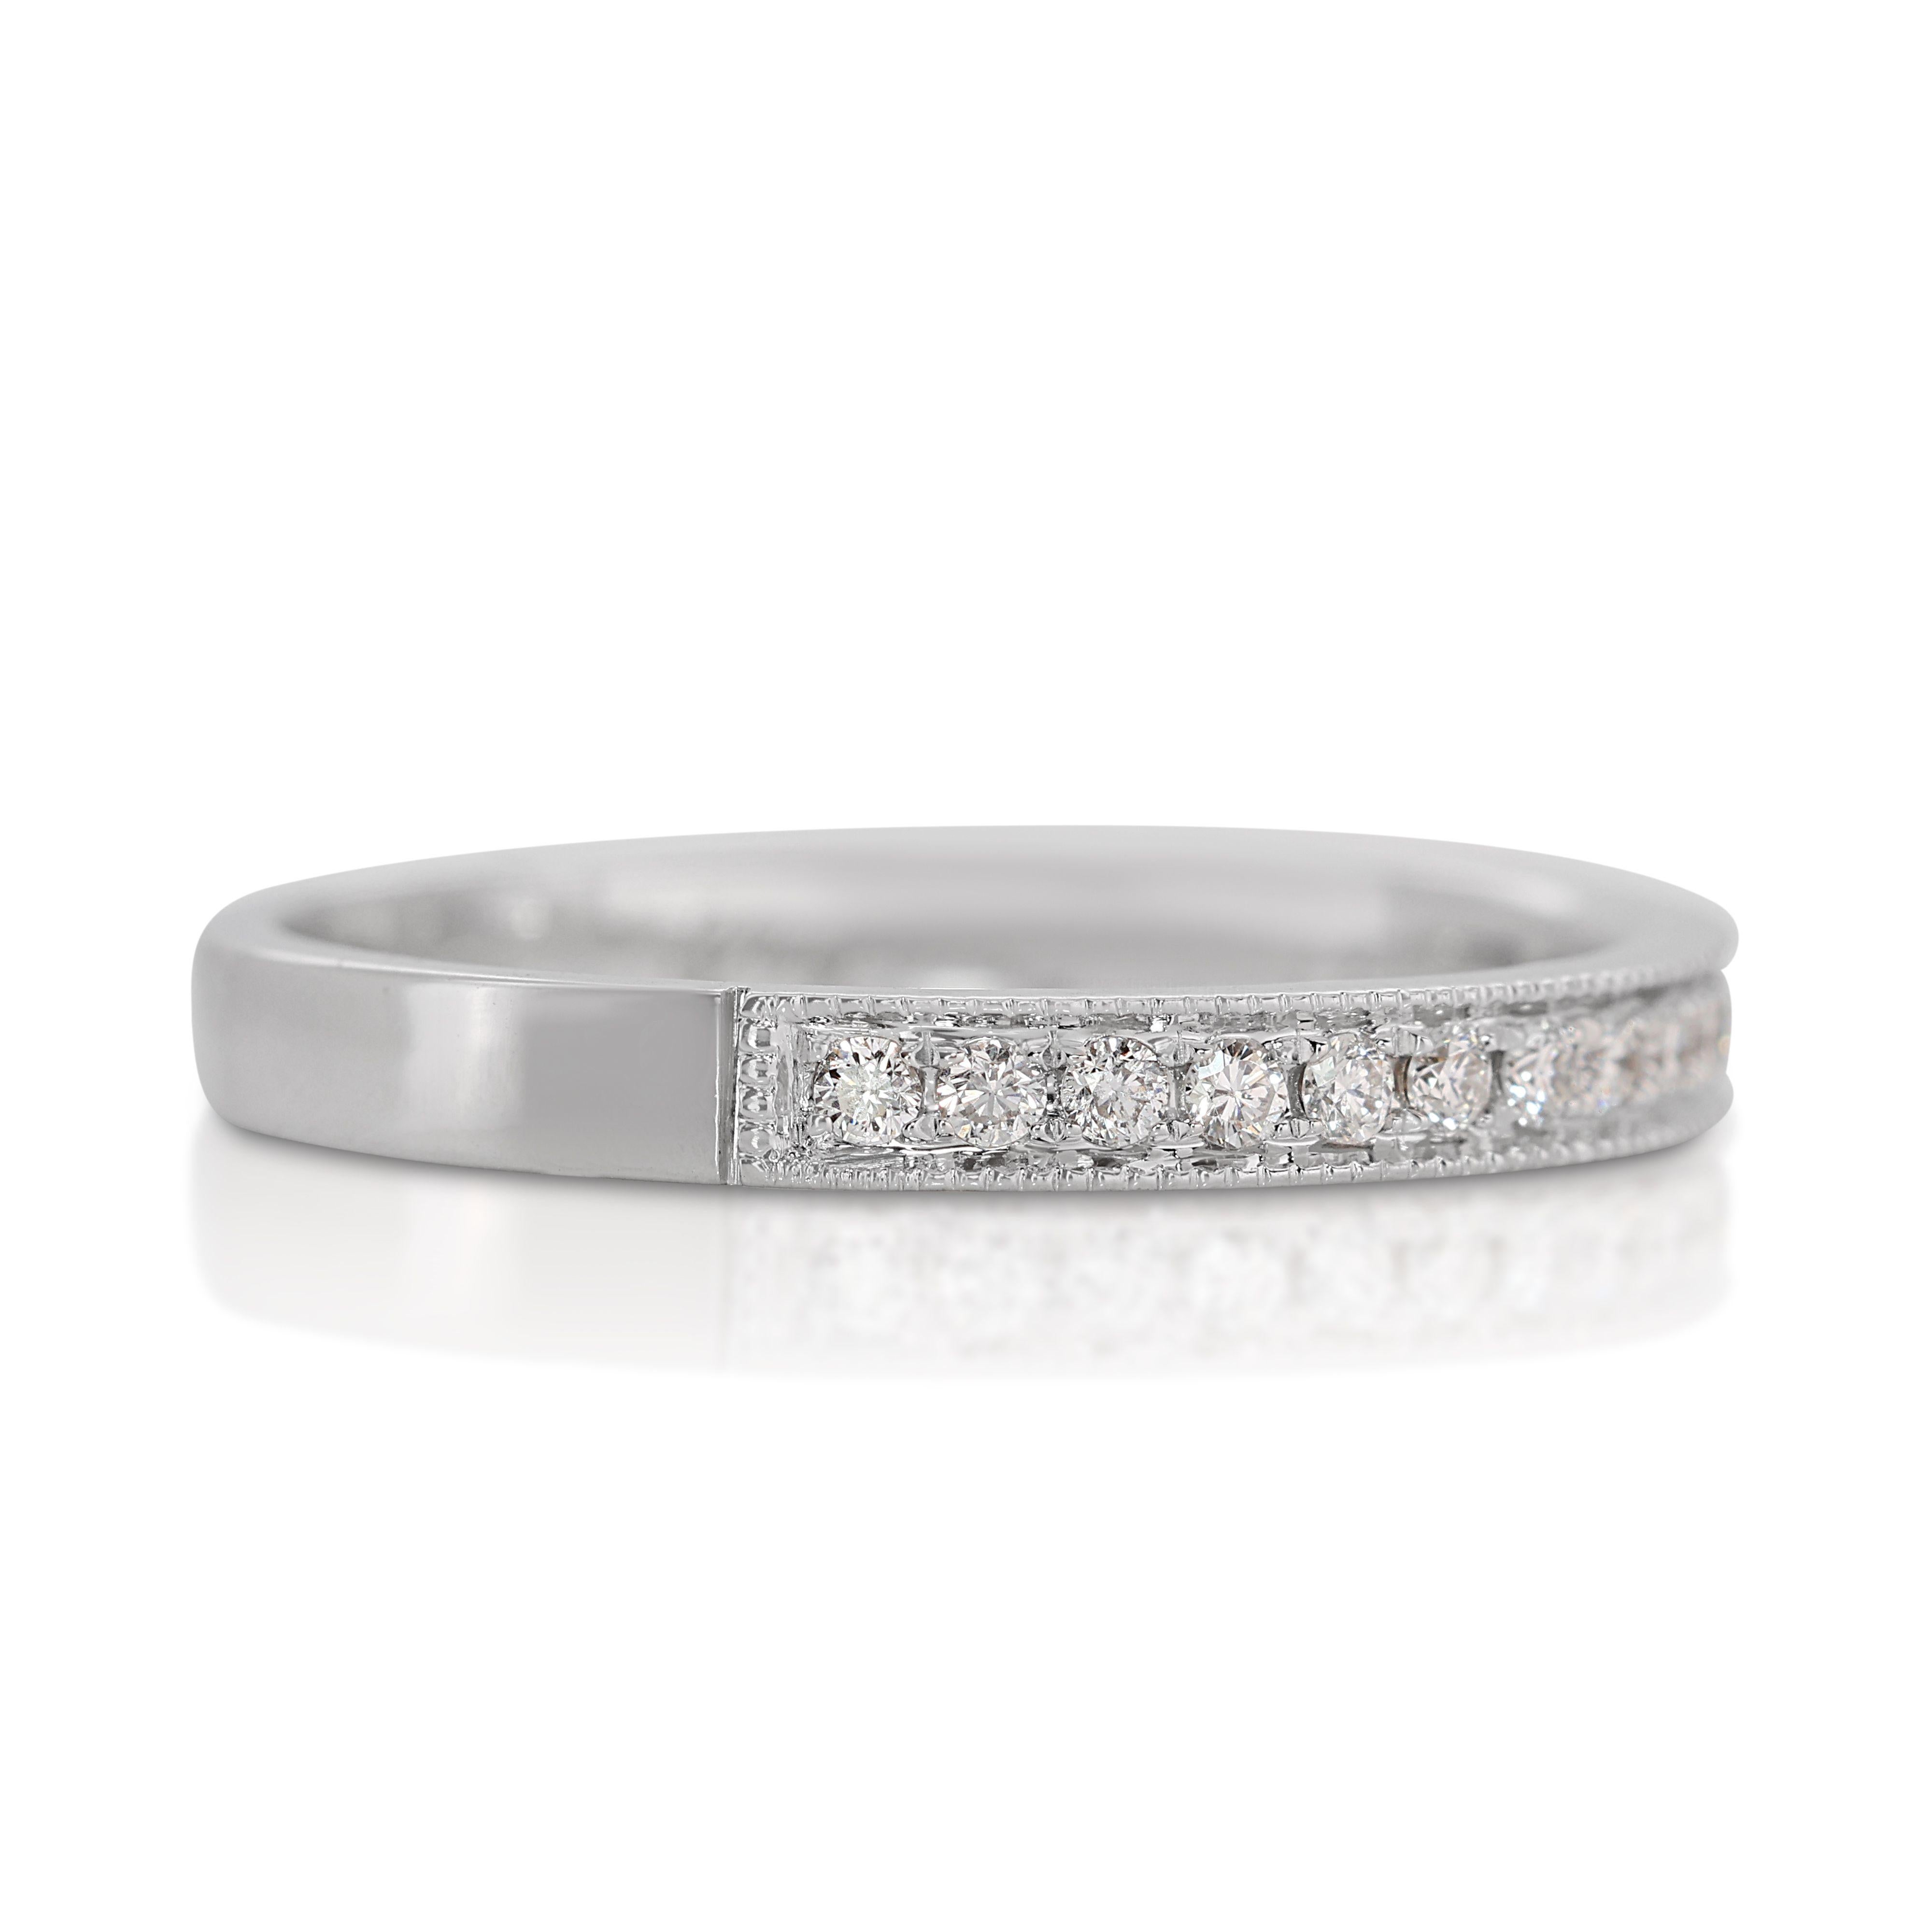 Dazzling 18k White Gold Pave Thin Band Ring with 0.18ct Natural Diamonds In Excellent Condition For Sale In רמת גן, IL